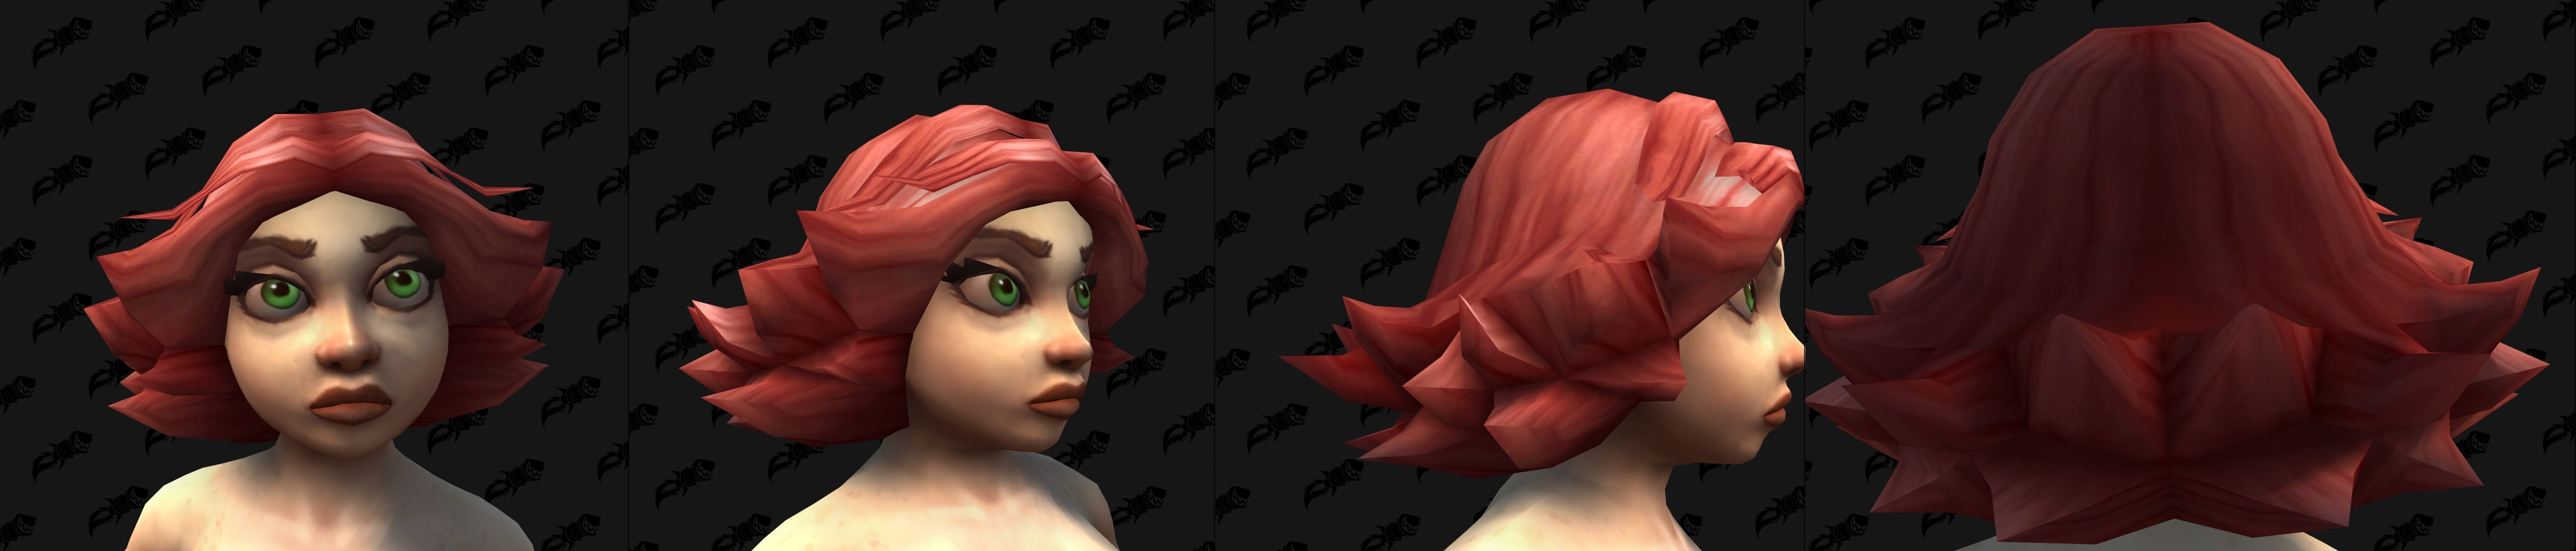 New Female Gnome Hairstyles in Shadowlands.